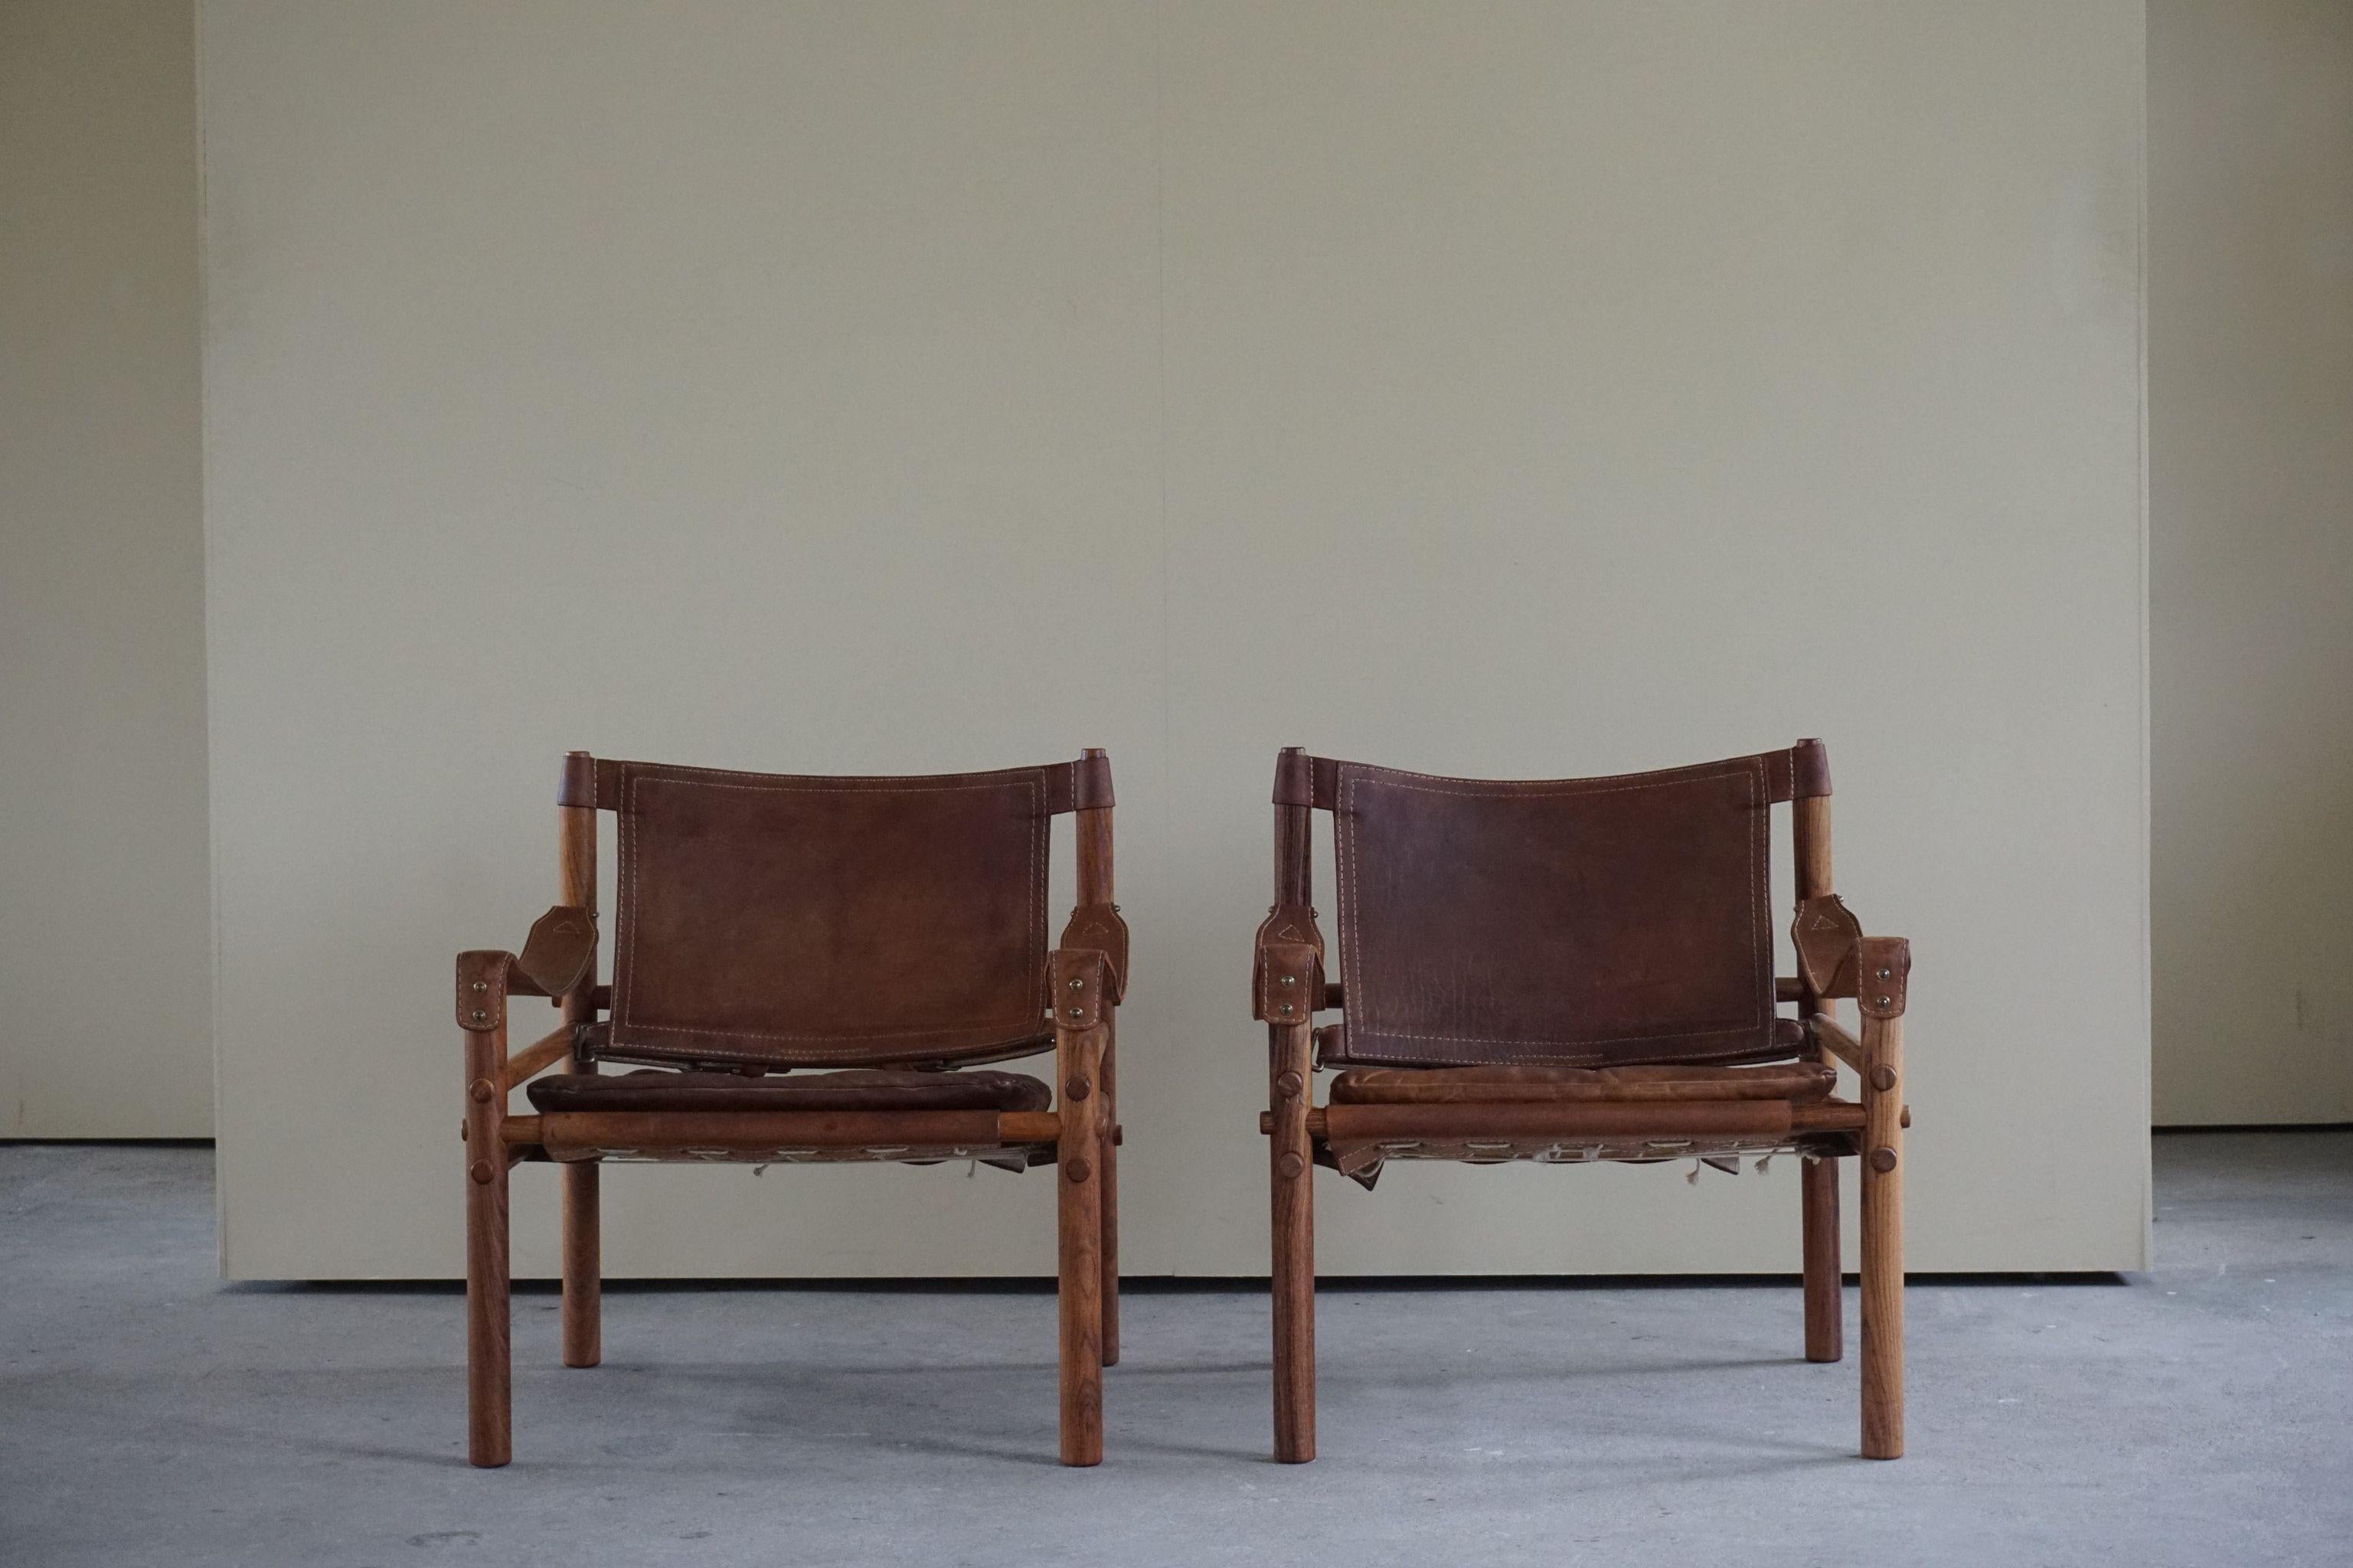 Pair of Sirocco Safari Chairs, Made by Arne Norell AB in Aneby Sweden, 1960s 12